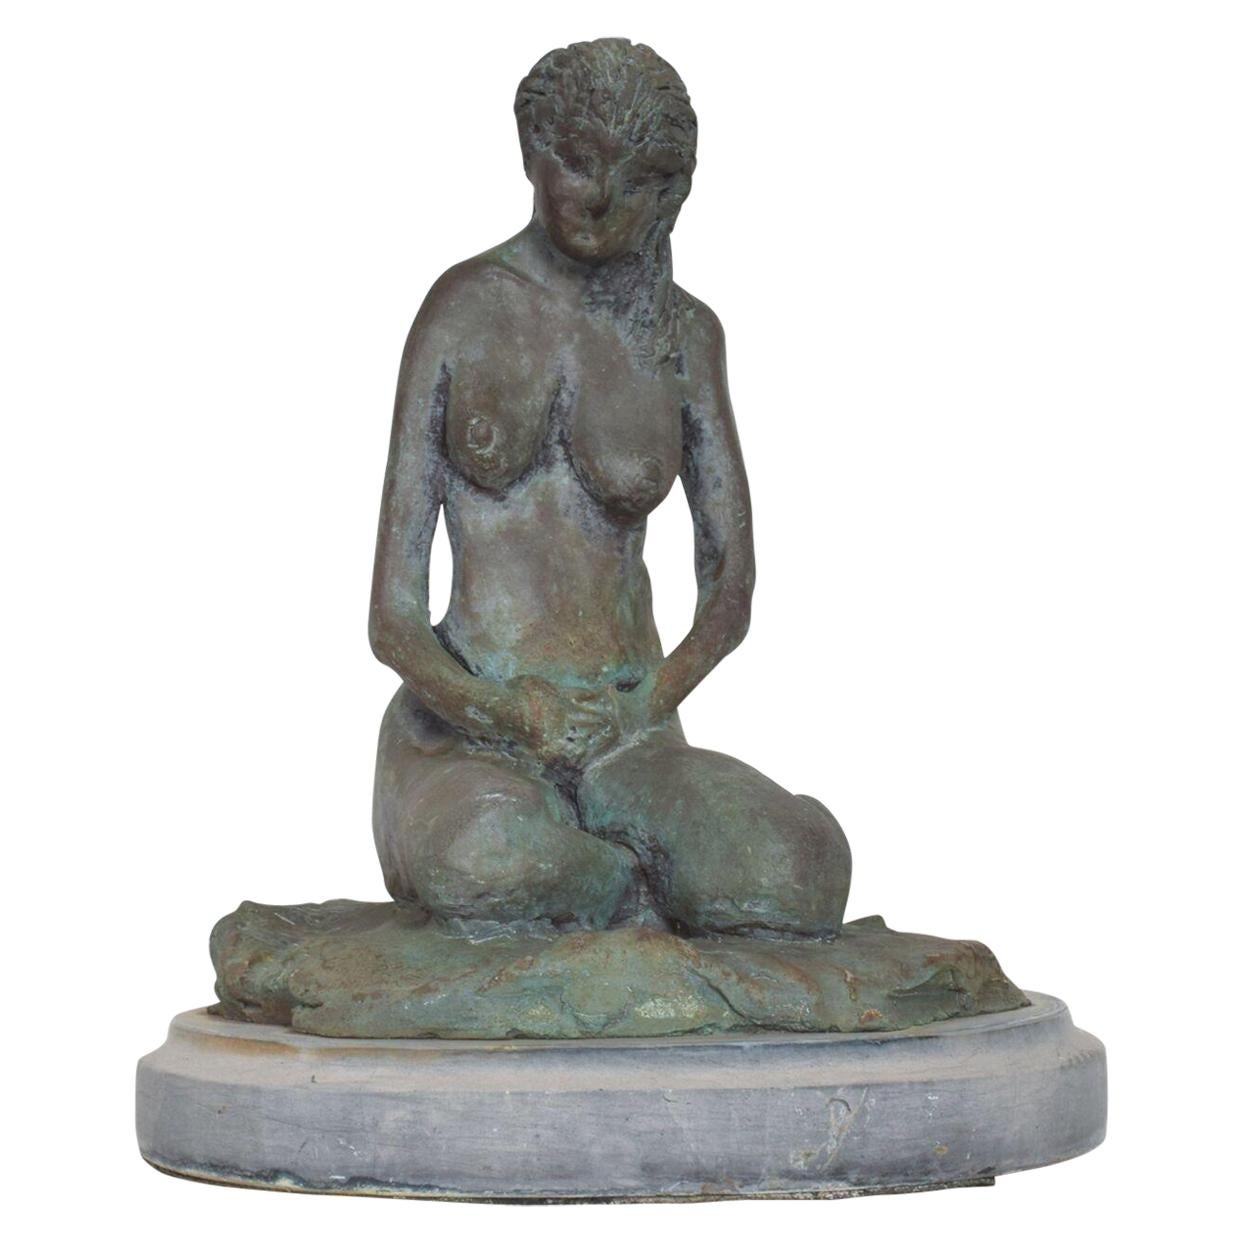 AMBIANIC presents
Modern Bronze Sculpture Nude Female Reflective Posture.
In the manner of Mexican Sculptor, Zuniga.
16.75 x 5.5 x 5.75
Preowned vintage condition
Original patina present.
Signed unable to read signature.
See images provided.
 